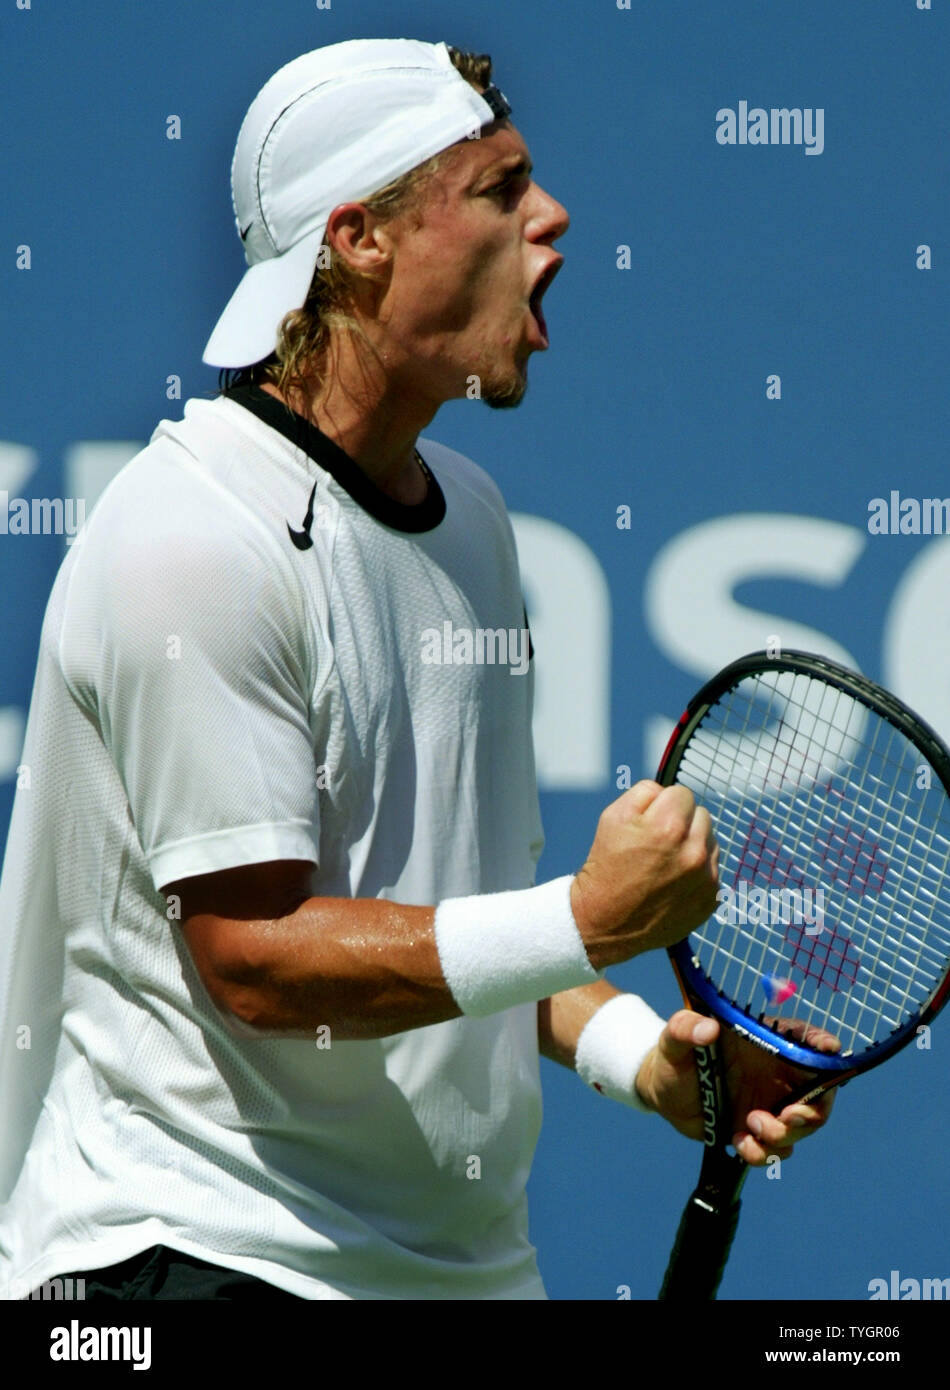 Lleyton Hewitt of Australia racts after winning a set against Karol Beck of  Slovakia during the 2004 US Open held at the National Tennis Center  September 7, 2004 at Flushing Meadows in